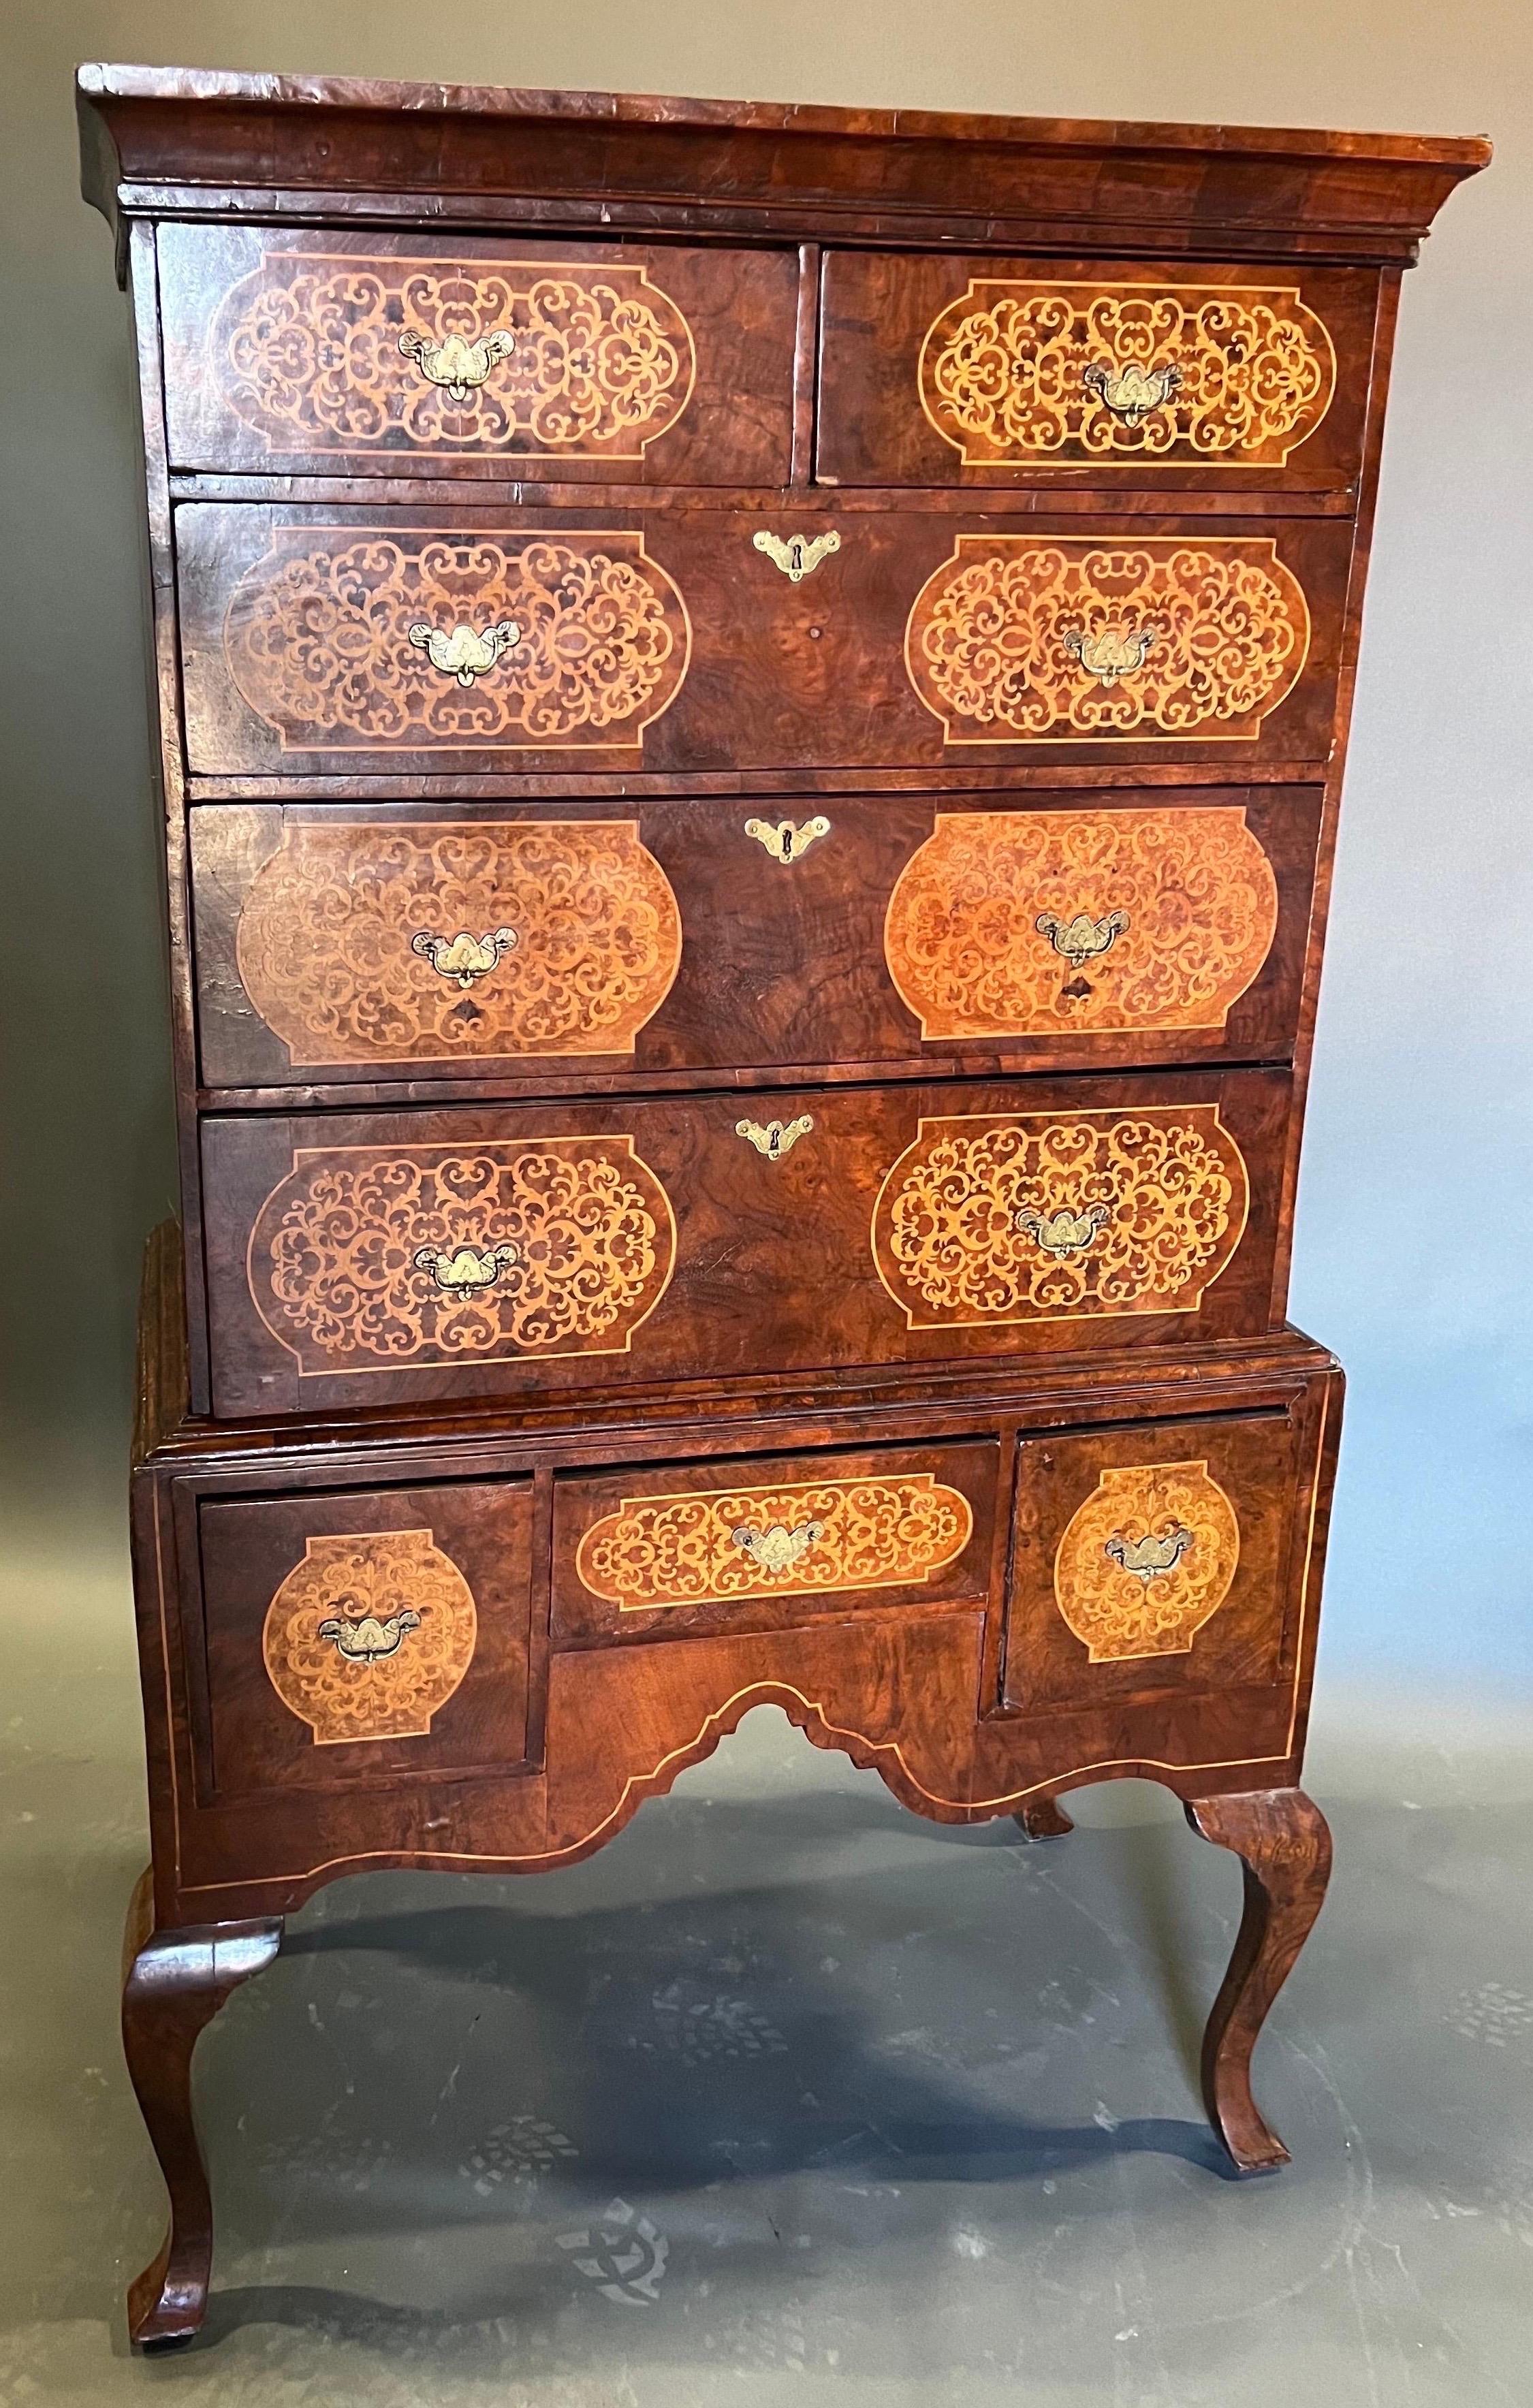 Nice early George II period 18th century English seaweed inlaid chest of frame. Top consists of two drawers over three while the base has three drawers. The seaweed inlay is fabulous. Nice rich color and patina throughout 